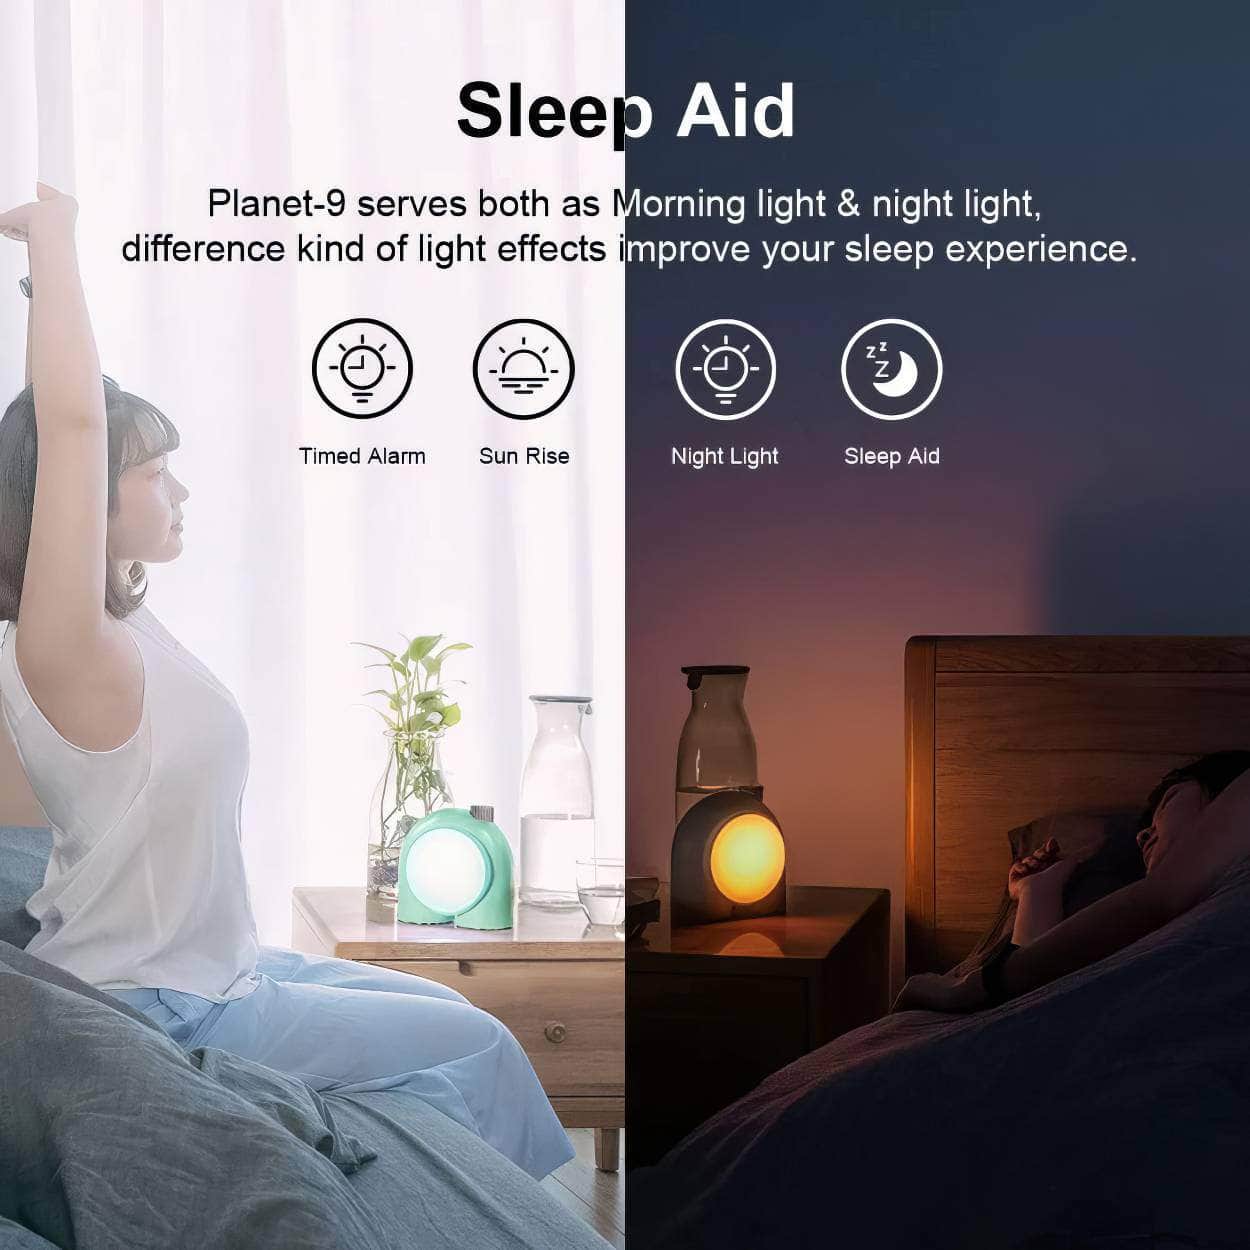 Divoom Planet-9 Decorative Mood Lamp - Programmable RGB LED Light Effects, Neon Atmosphere Bedside Lamp with Music Control